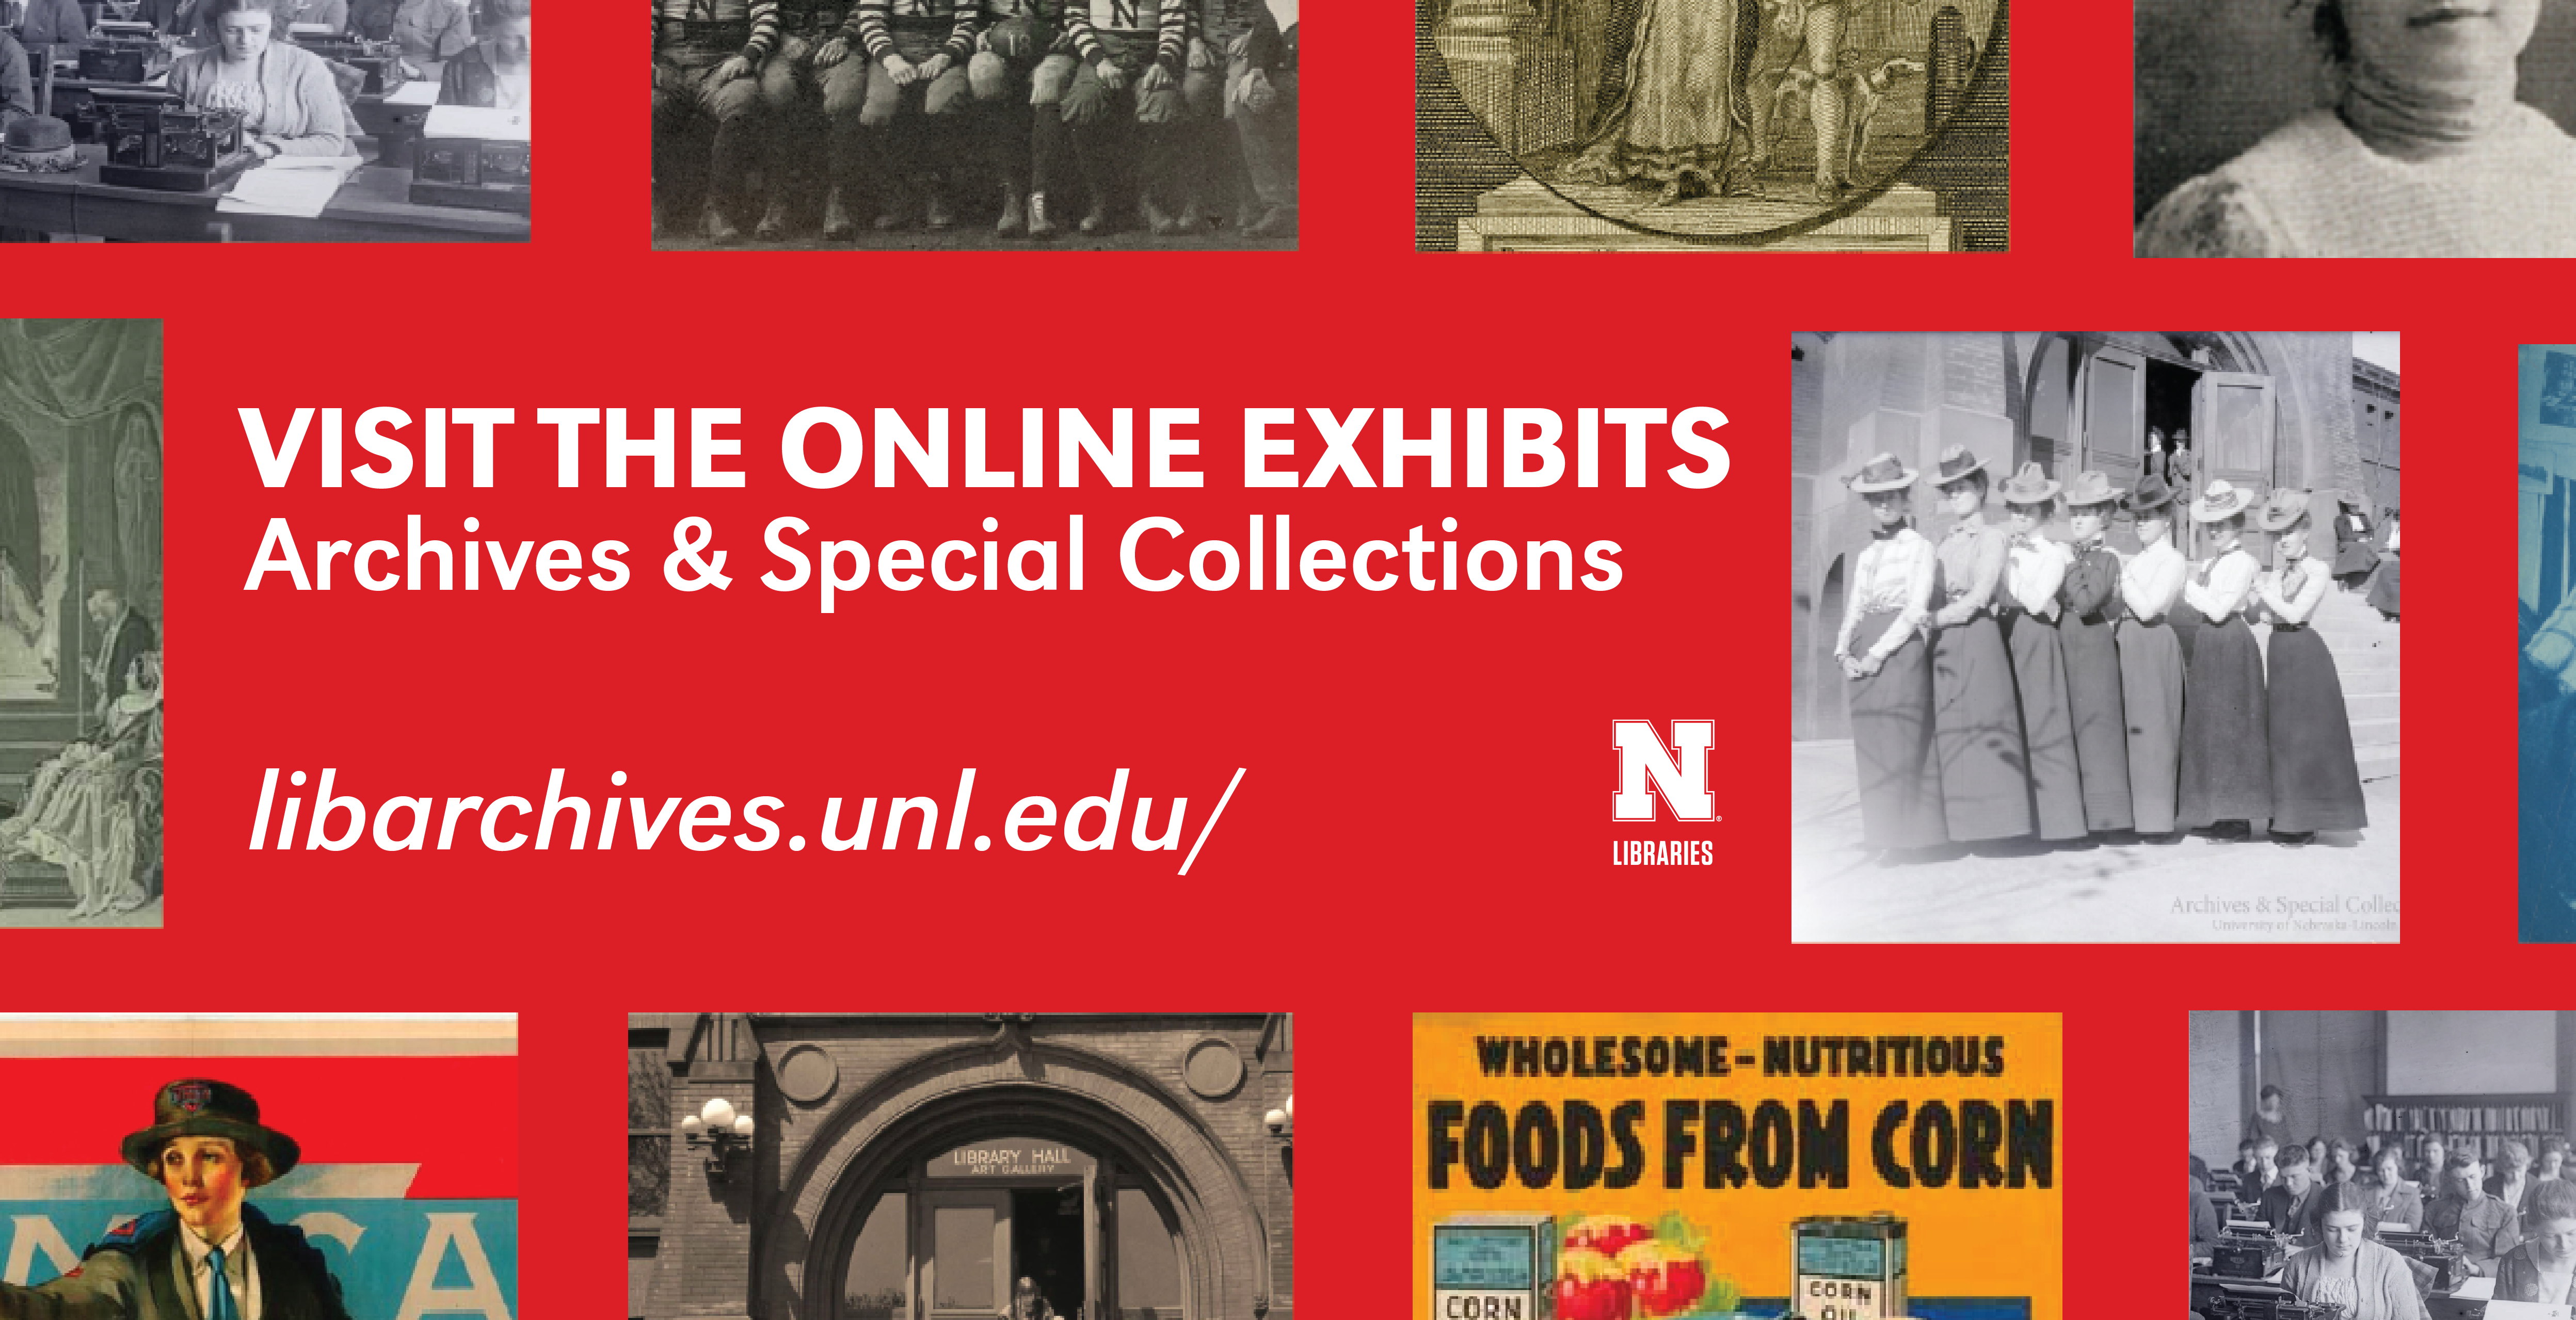 Explore Archives & Special Collections' online exhibits